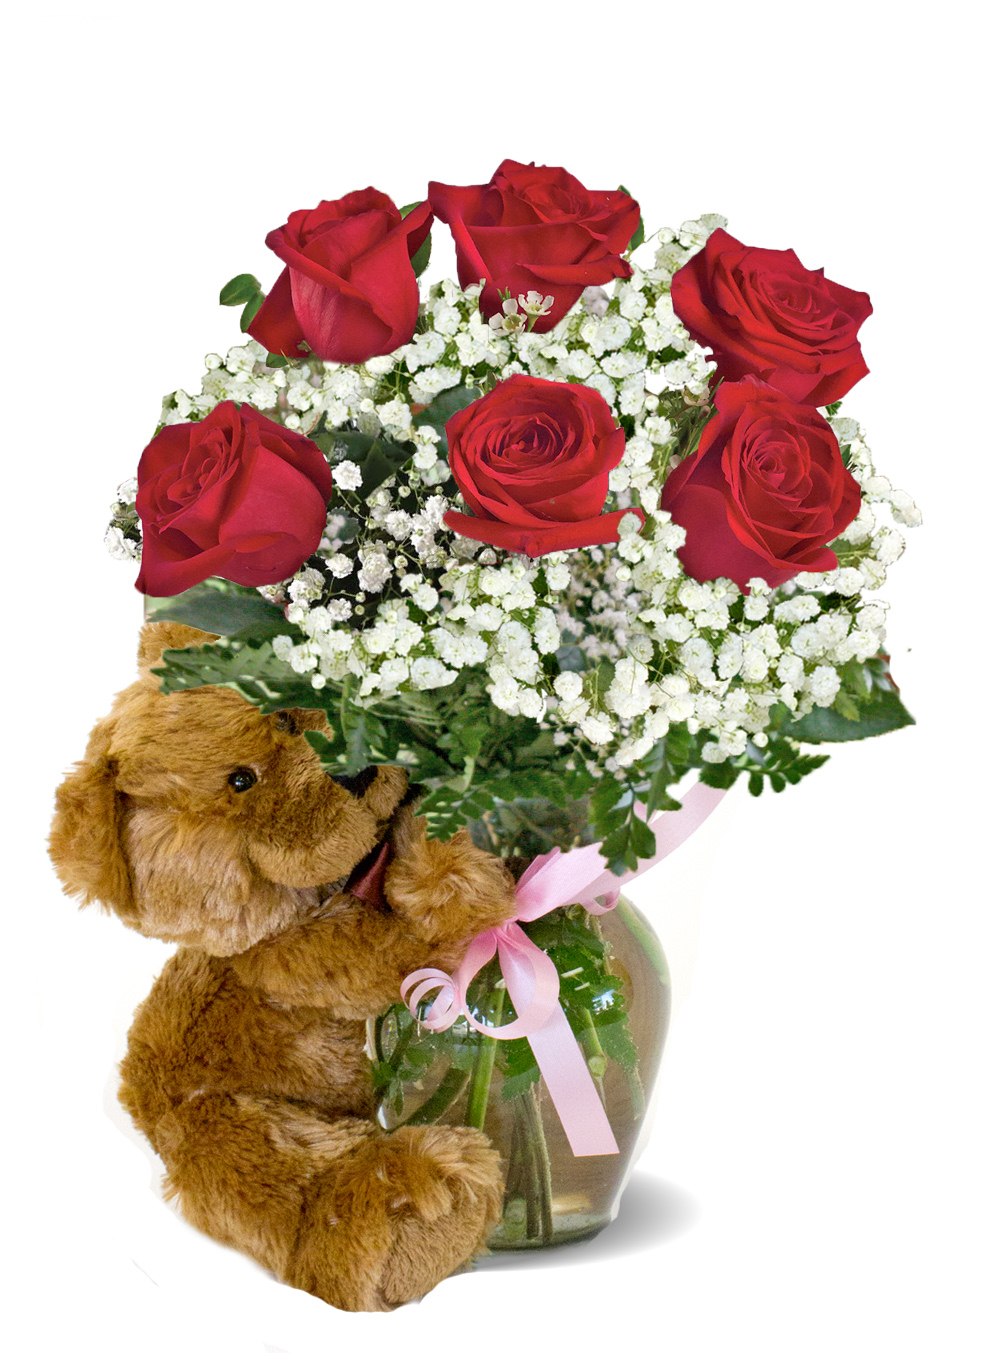 Roses Hugs And Roses Columbus Oh Florist Flowerama Columbus Same Day Flower Delivery